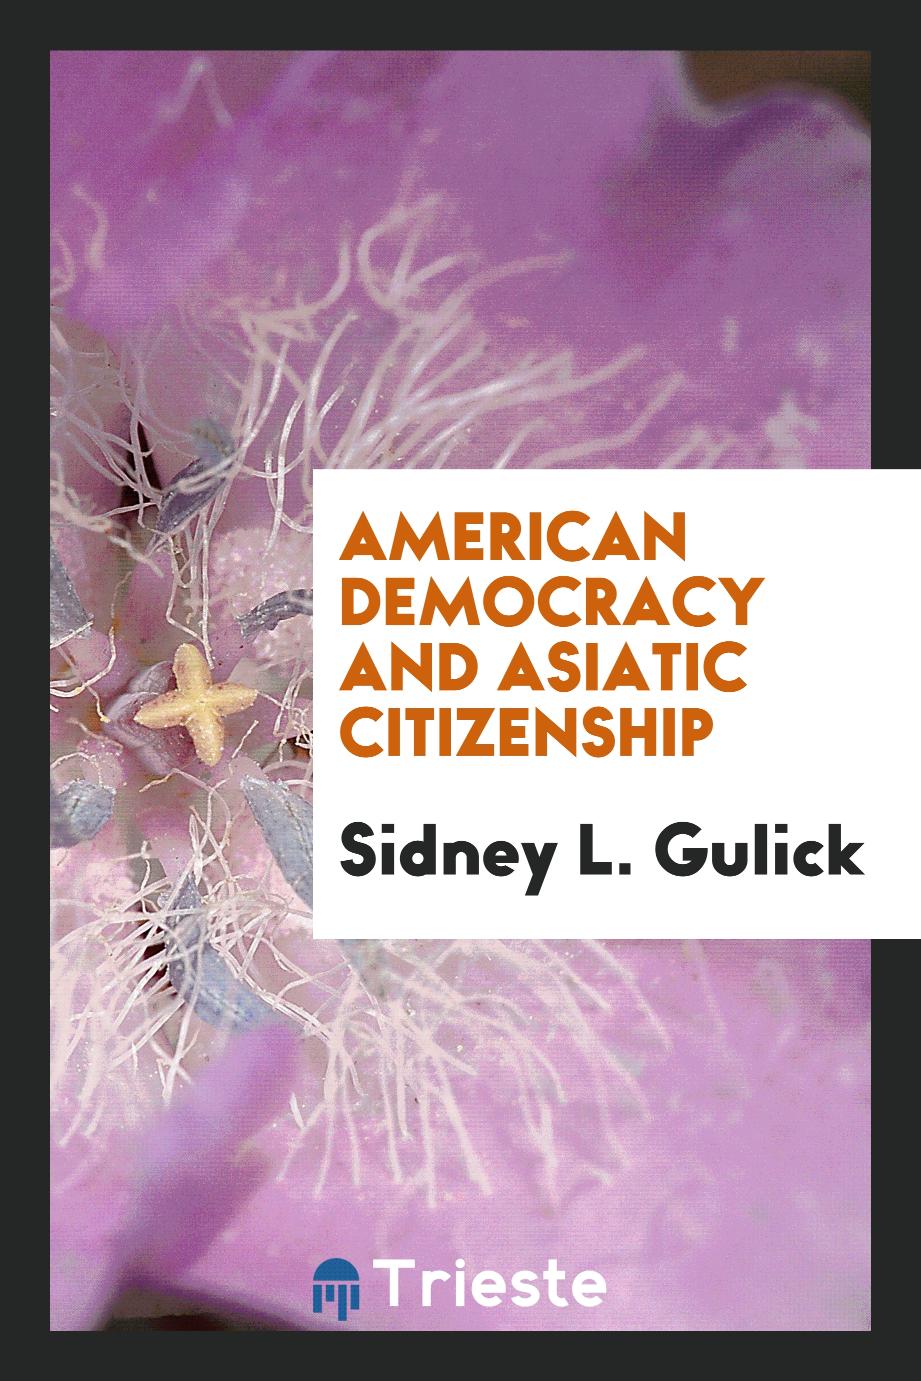 American democracy and Asiatic citizenship